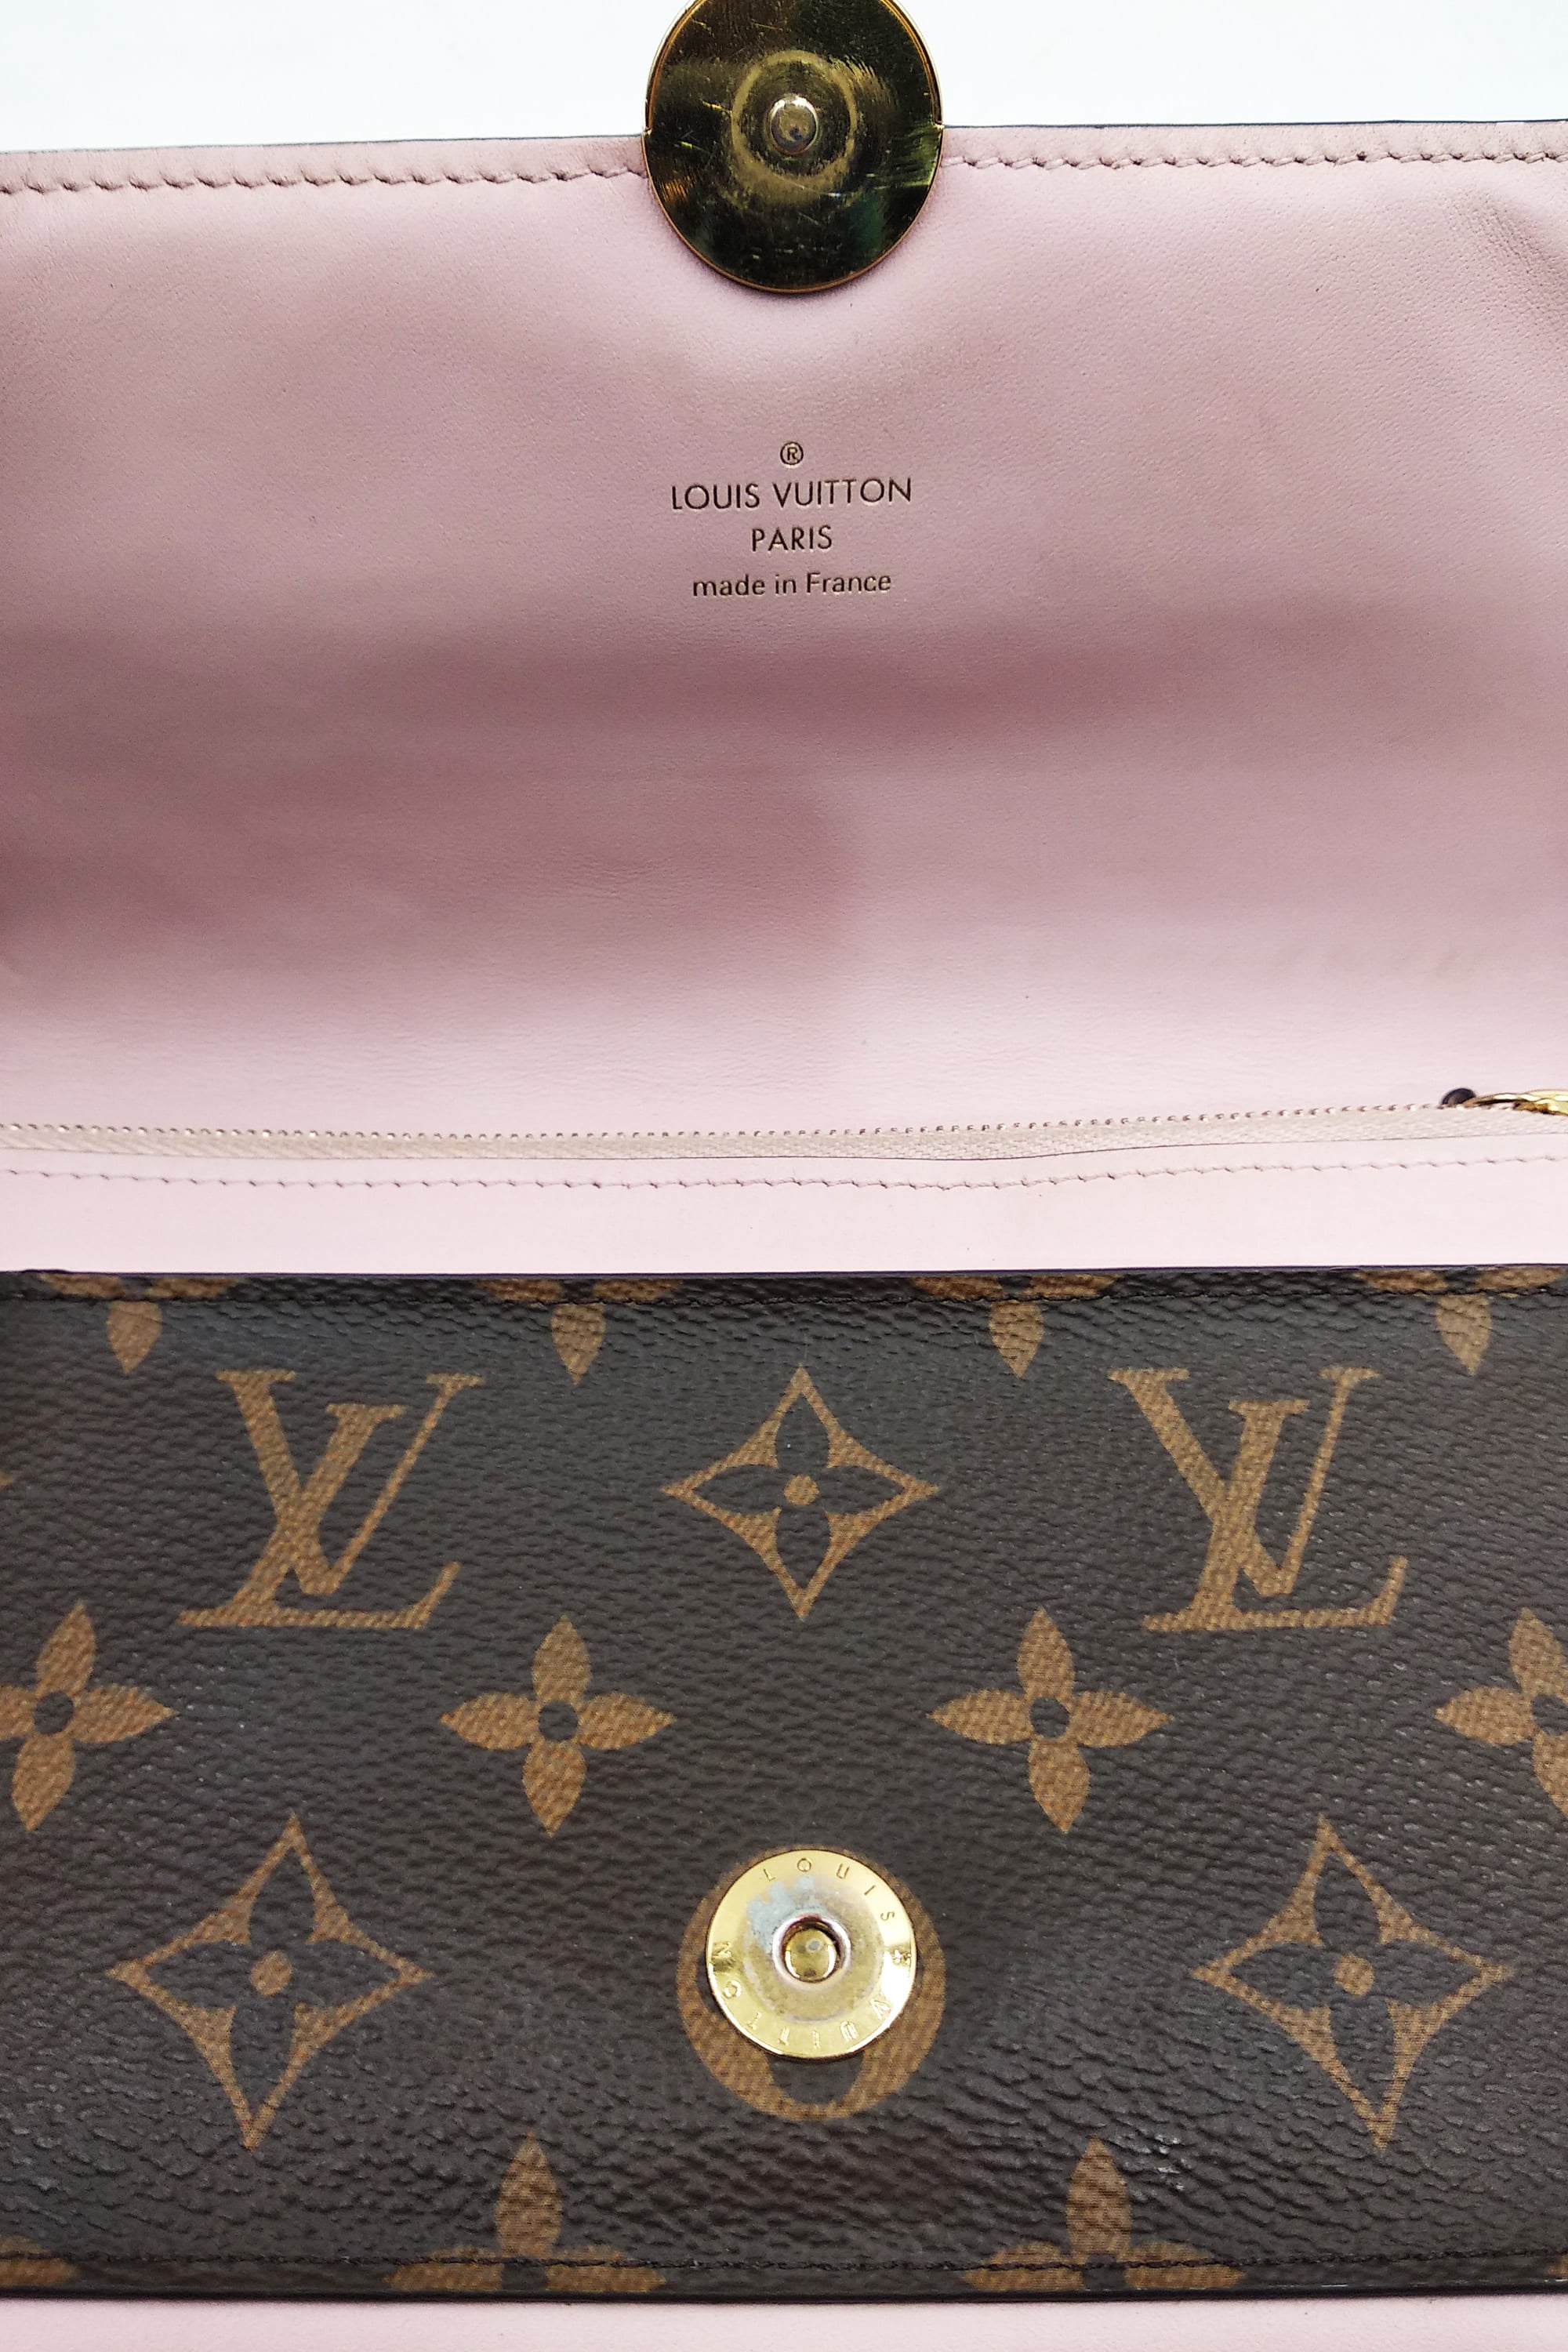 used Pre-owned Louis Vuitton Chain Wallet Shoulder Bag Louis Vuitton Flore Chain Wallet M69036 Denim Monogram (Like New), Adult Unisex, Size: (HxWxD)